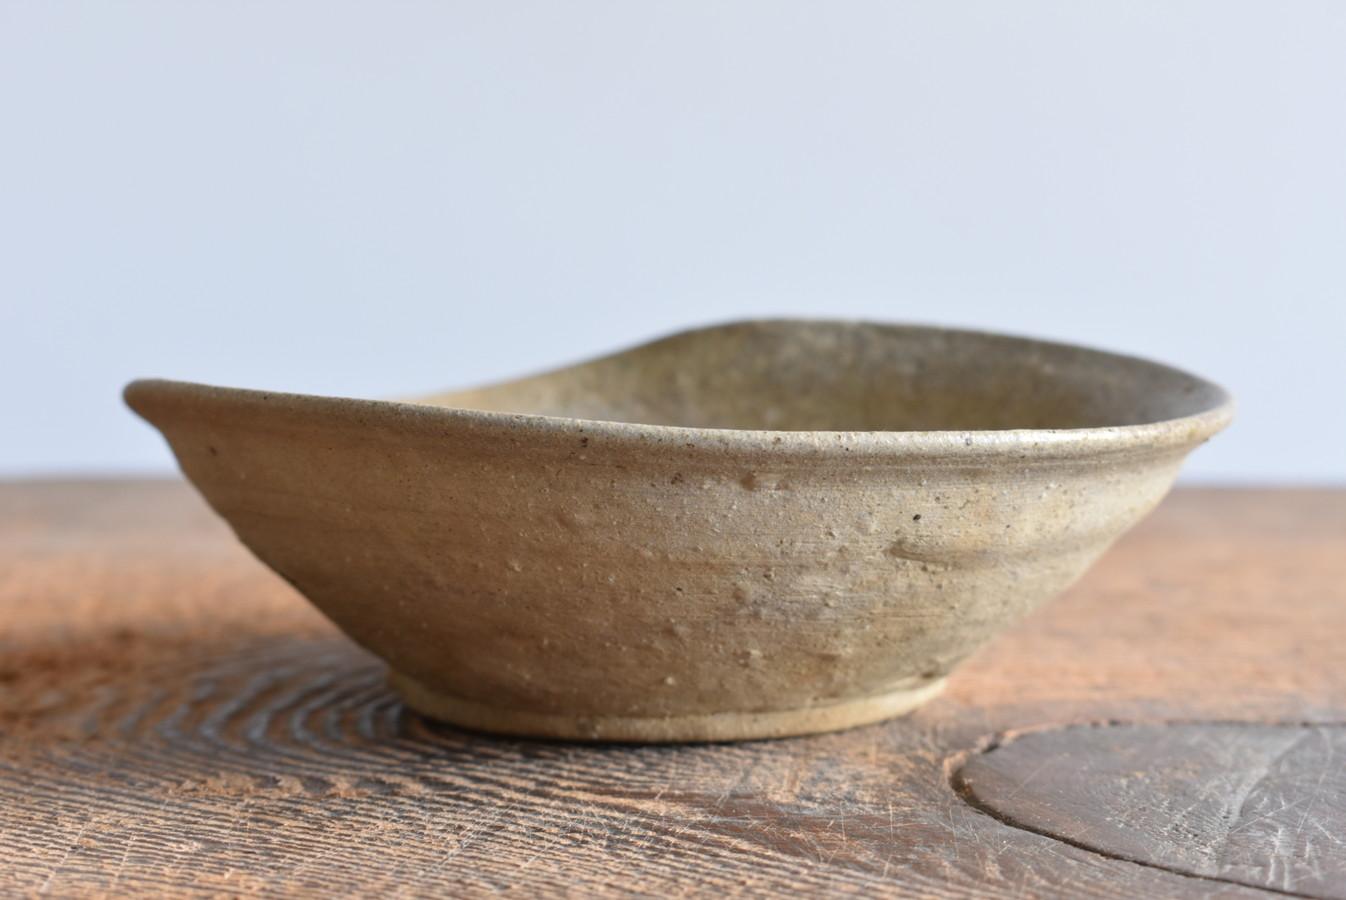 18th Century and Earlier Japanese Very Old Excavated Pottery Bowl / 12th-13th Century / Wabi Sabi Object For Sale